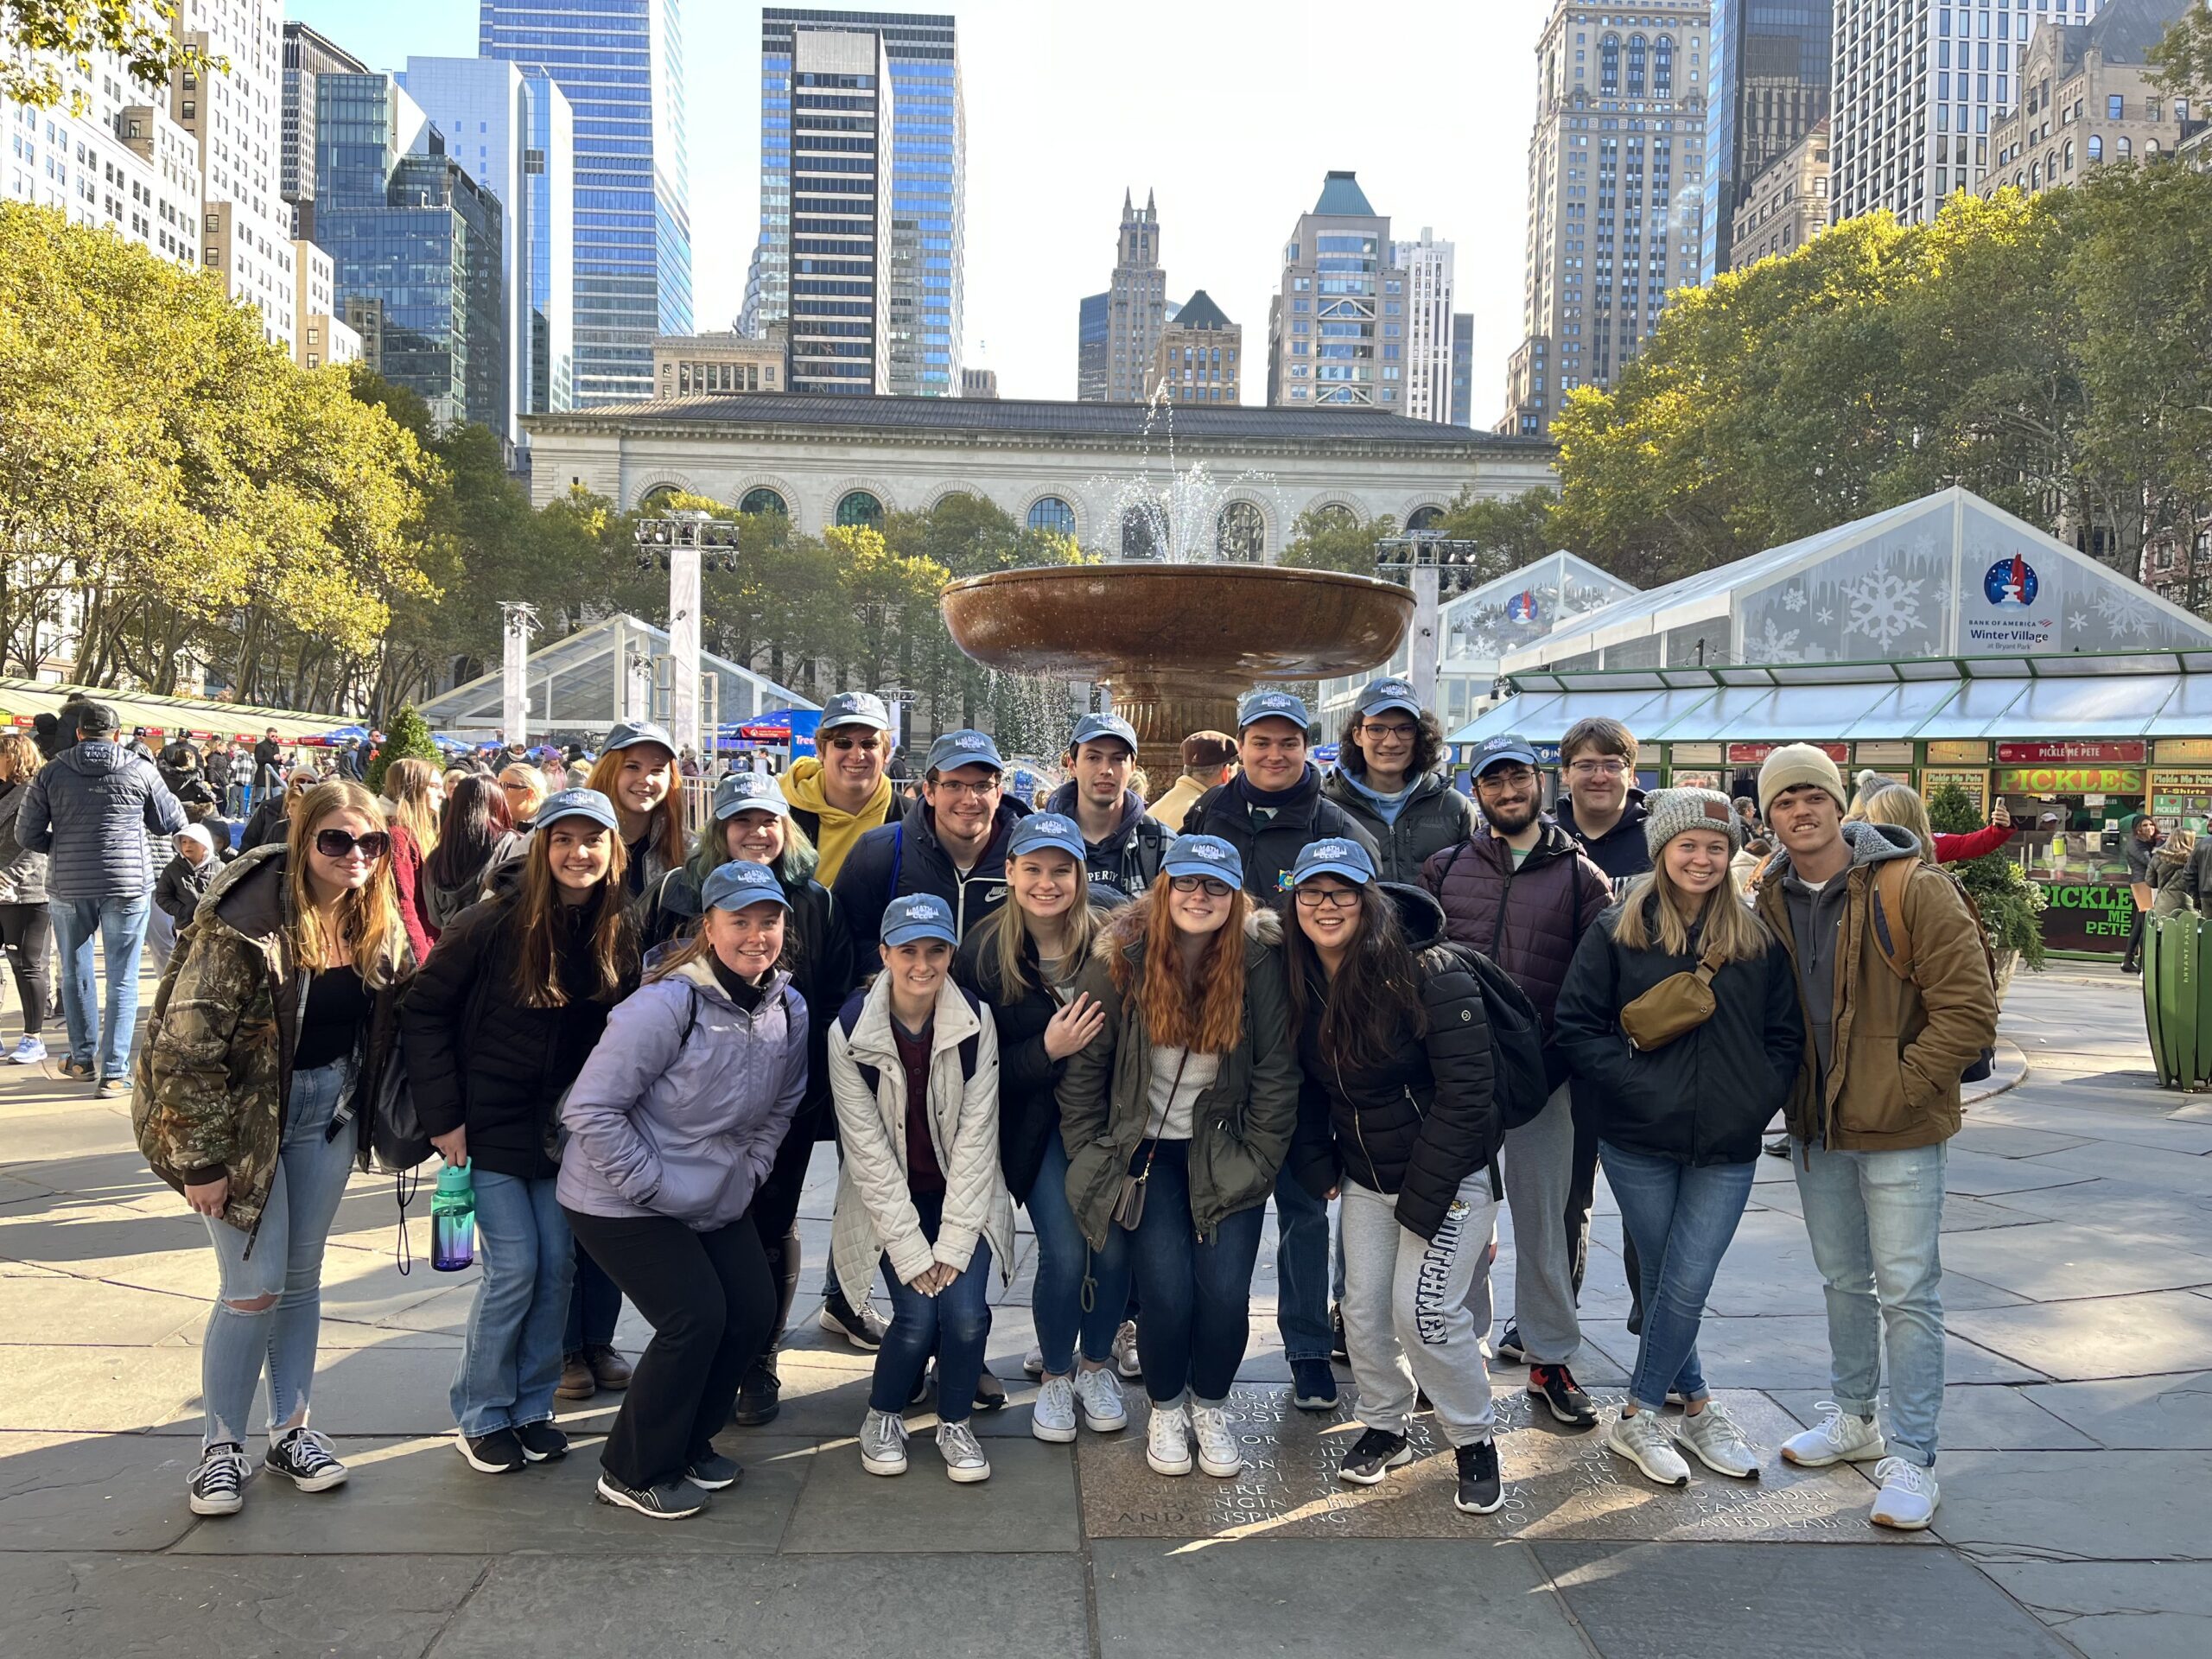 LVC math club students pose for photo during trip to New York City